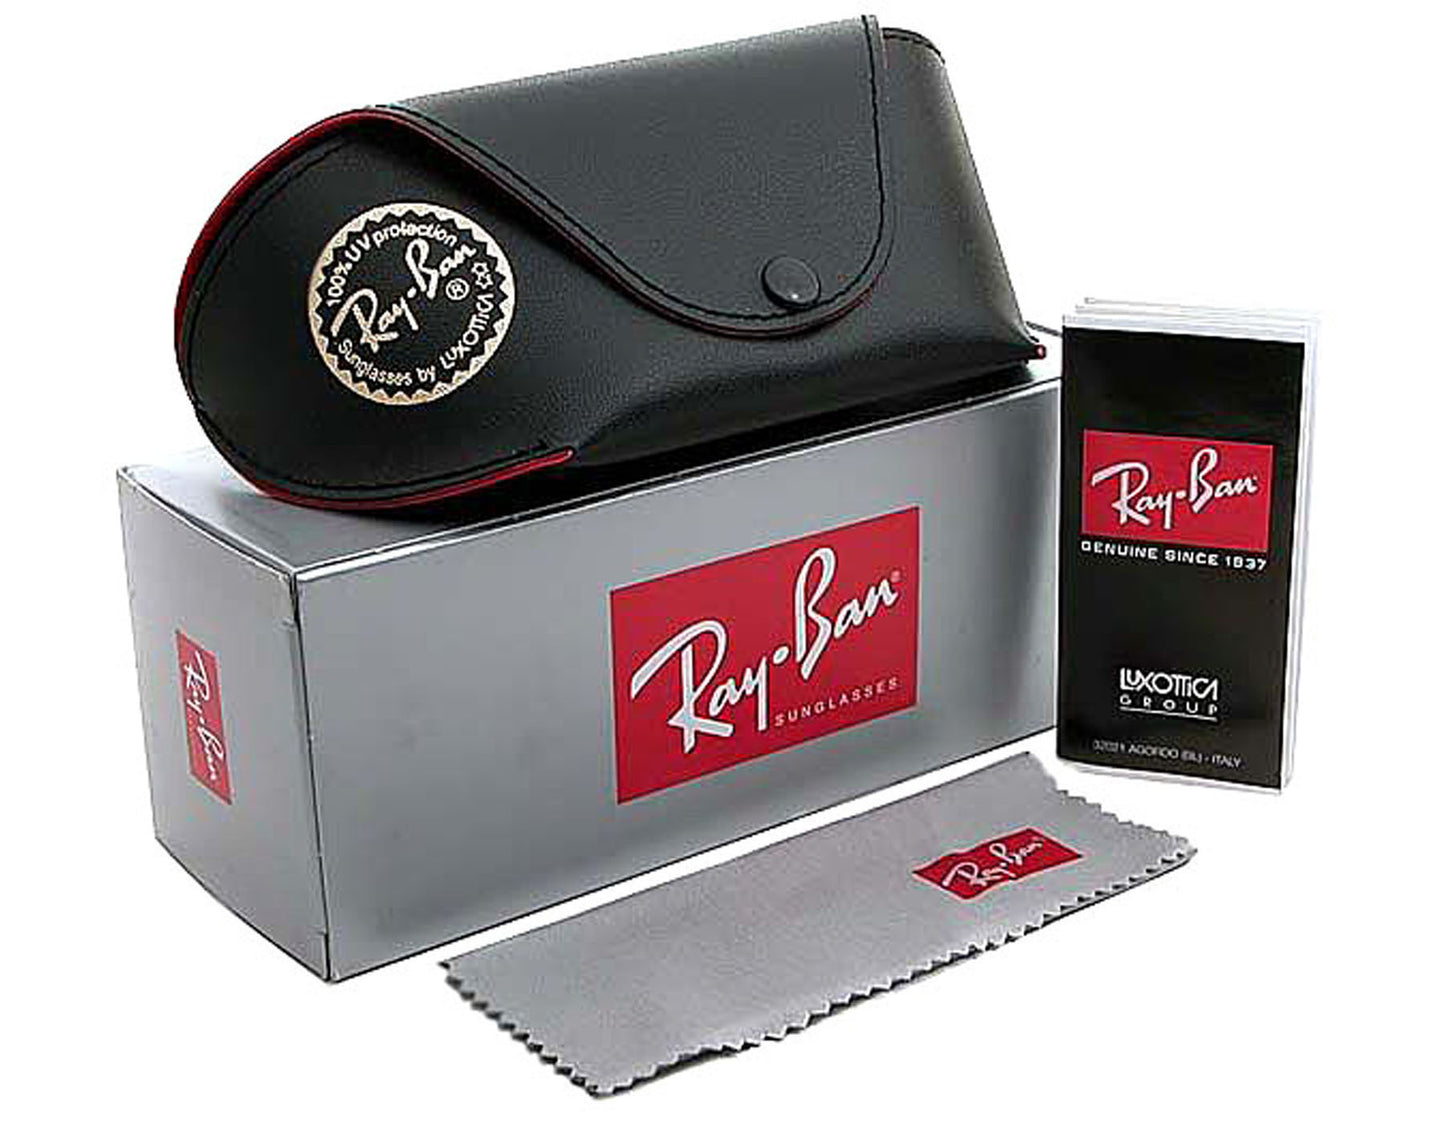 Ray Ban RB4374-601-3156 00mm New Sunglasses